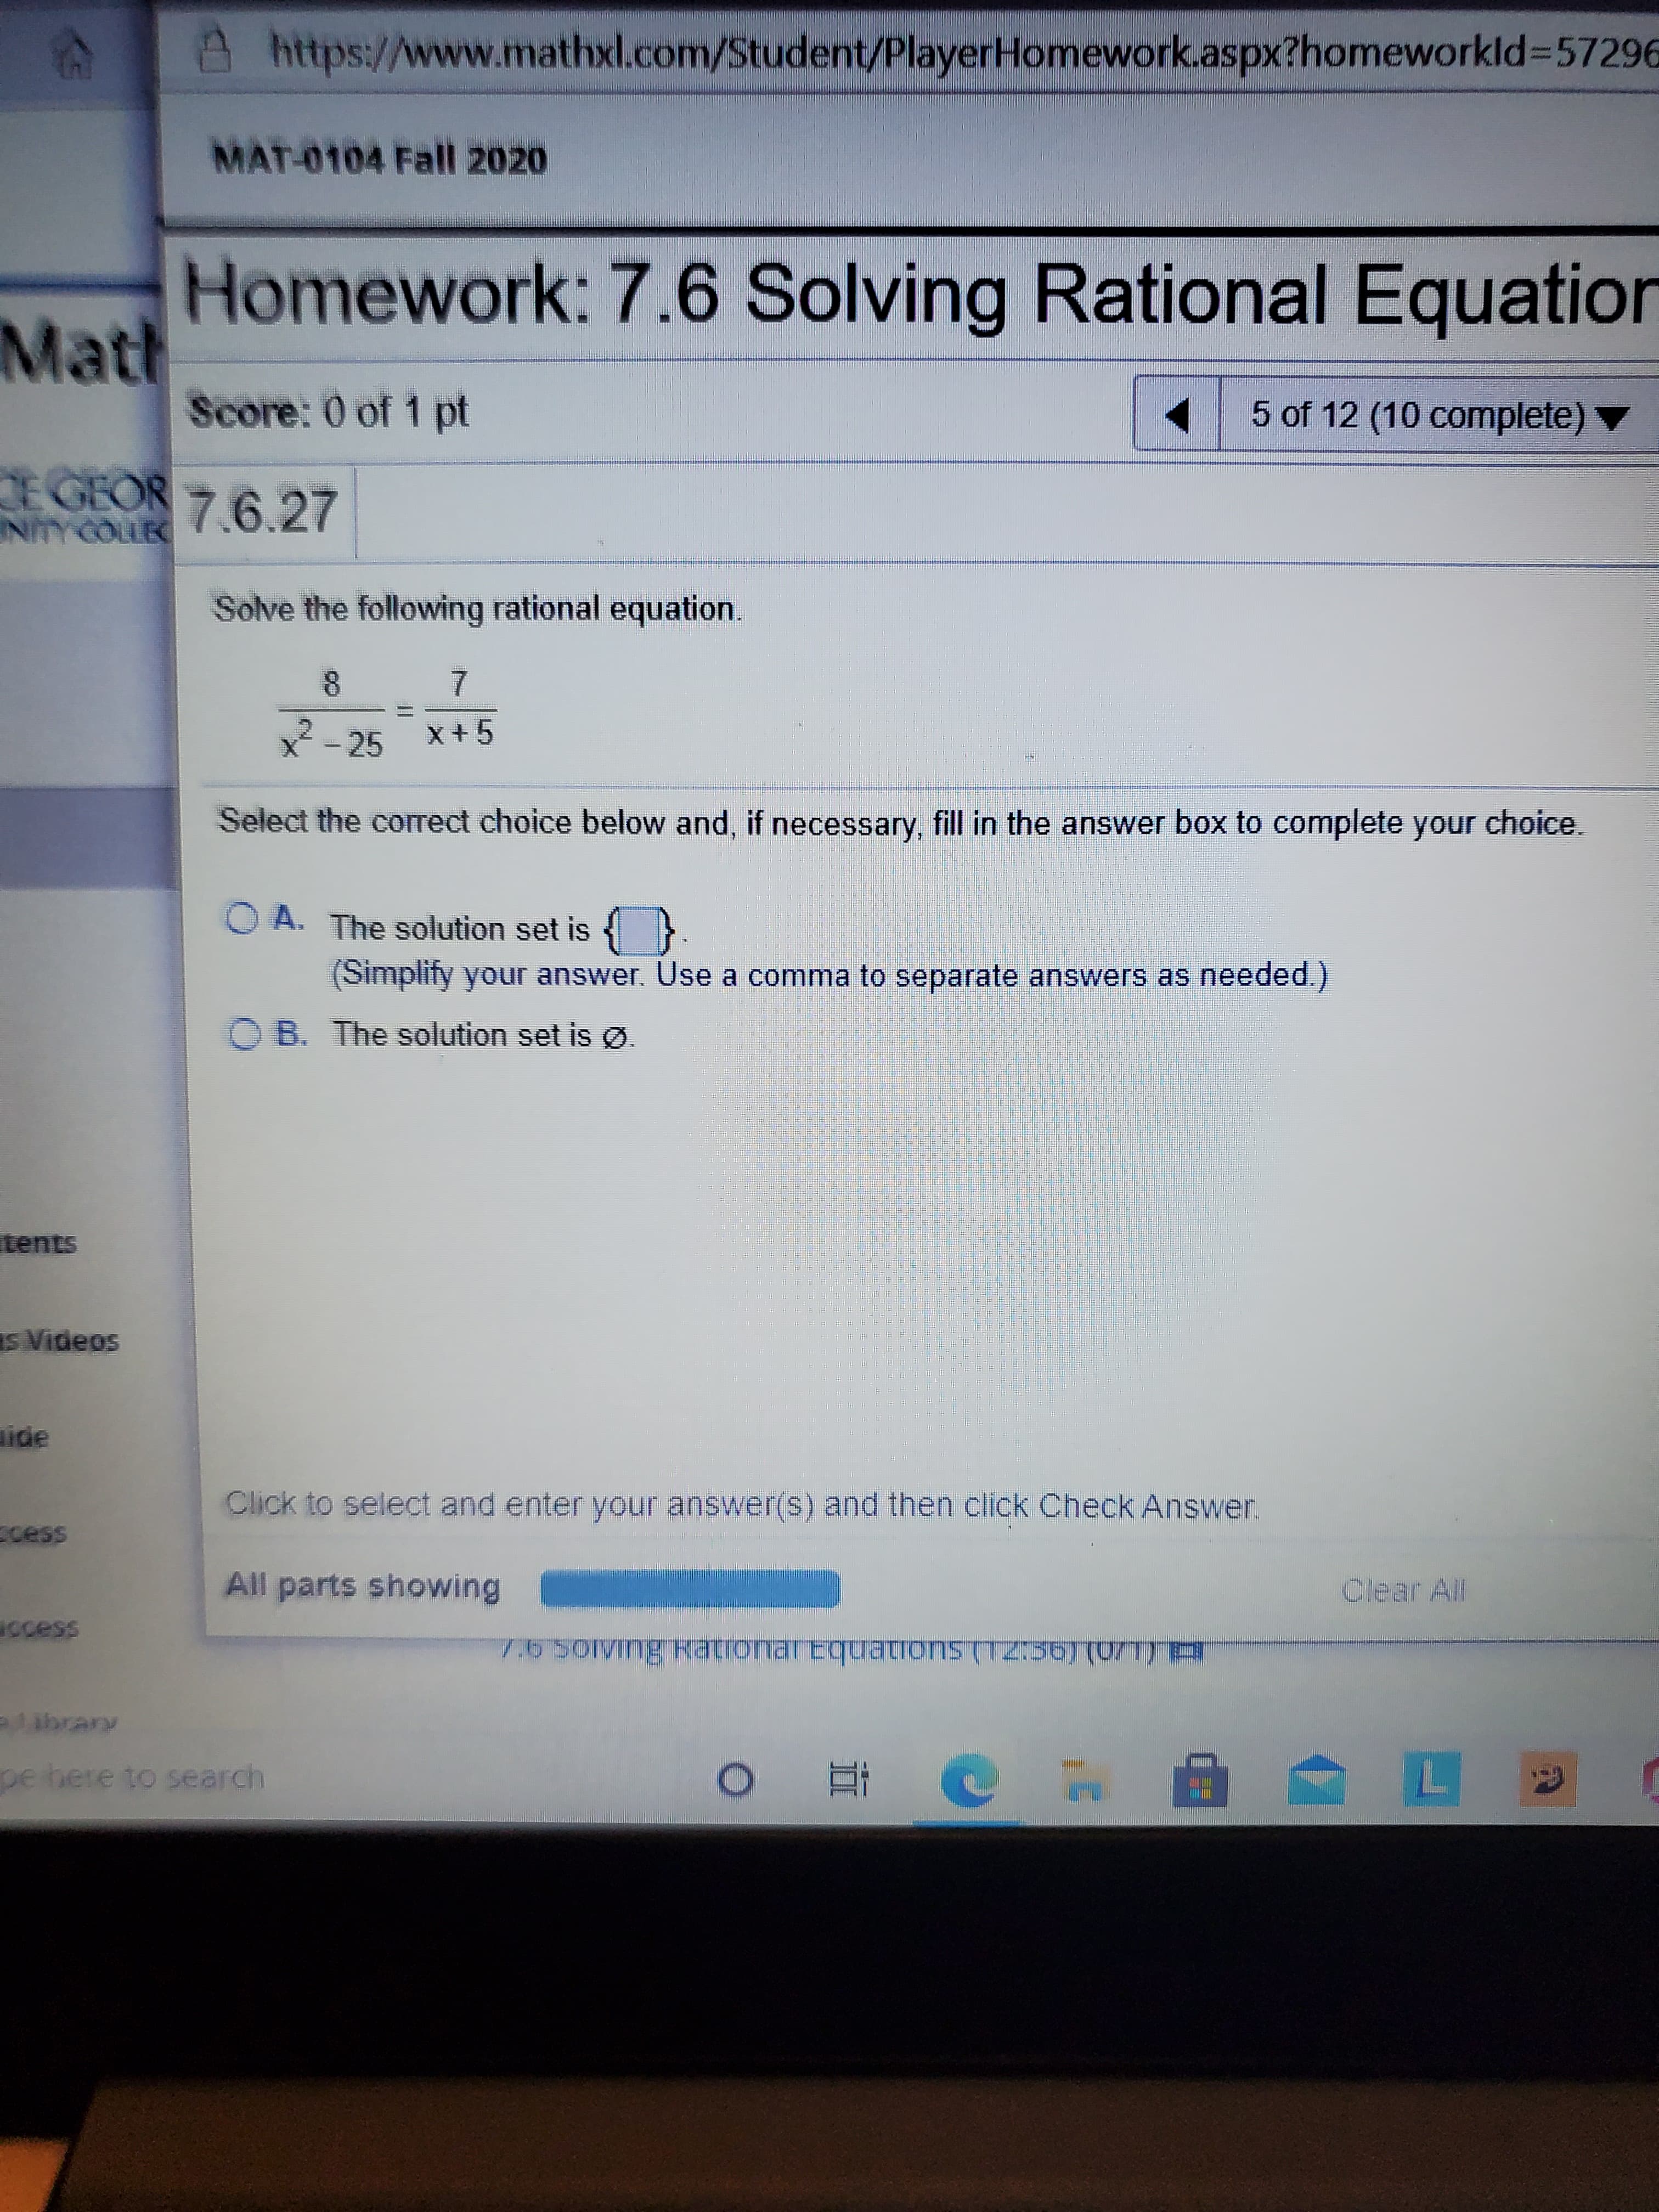 Solve the following rational equation.
8.
x - 25
x+5
Select the correct choice below and, if necessary, fill in the answer box to complete your choice.
O A. The solution set is {}.
(Simplity your answer. Use a comma to separate answers as needed.)
O B. The solution set is ø.
